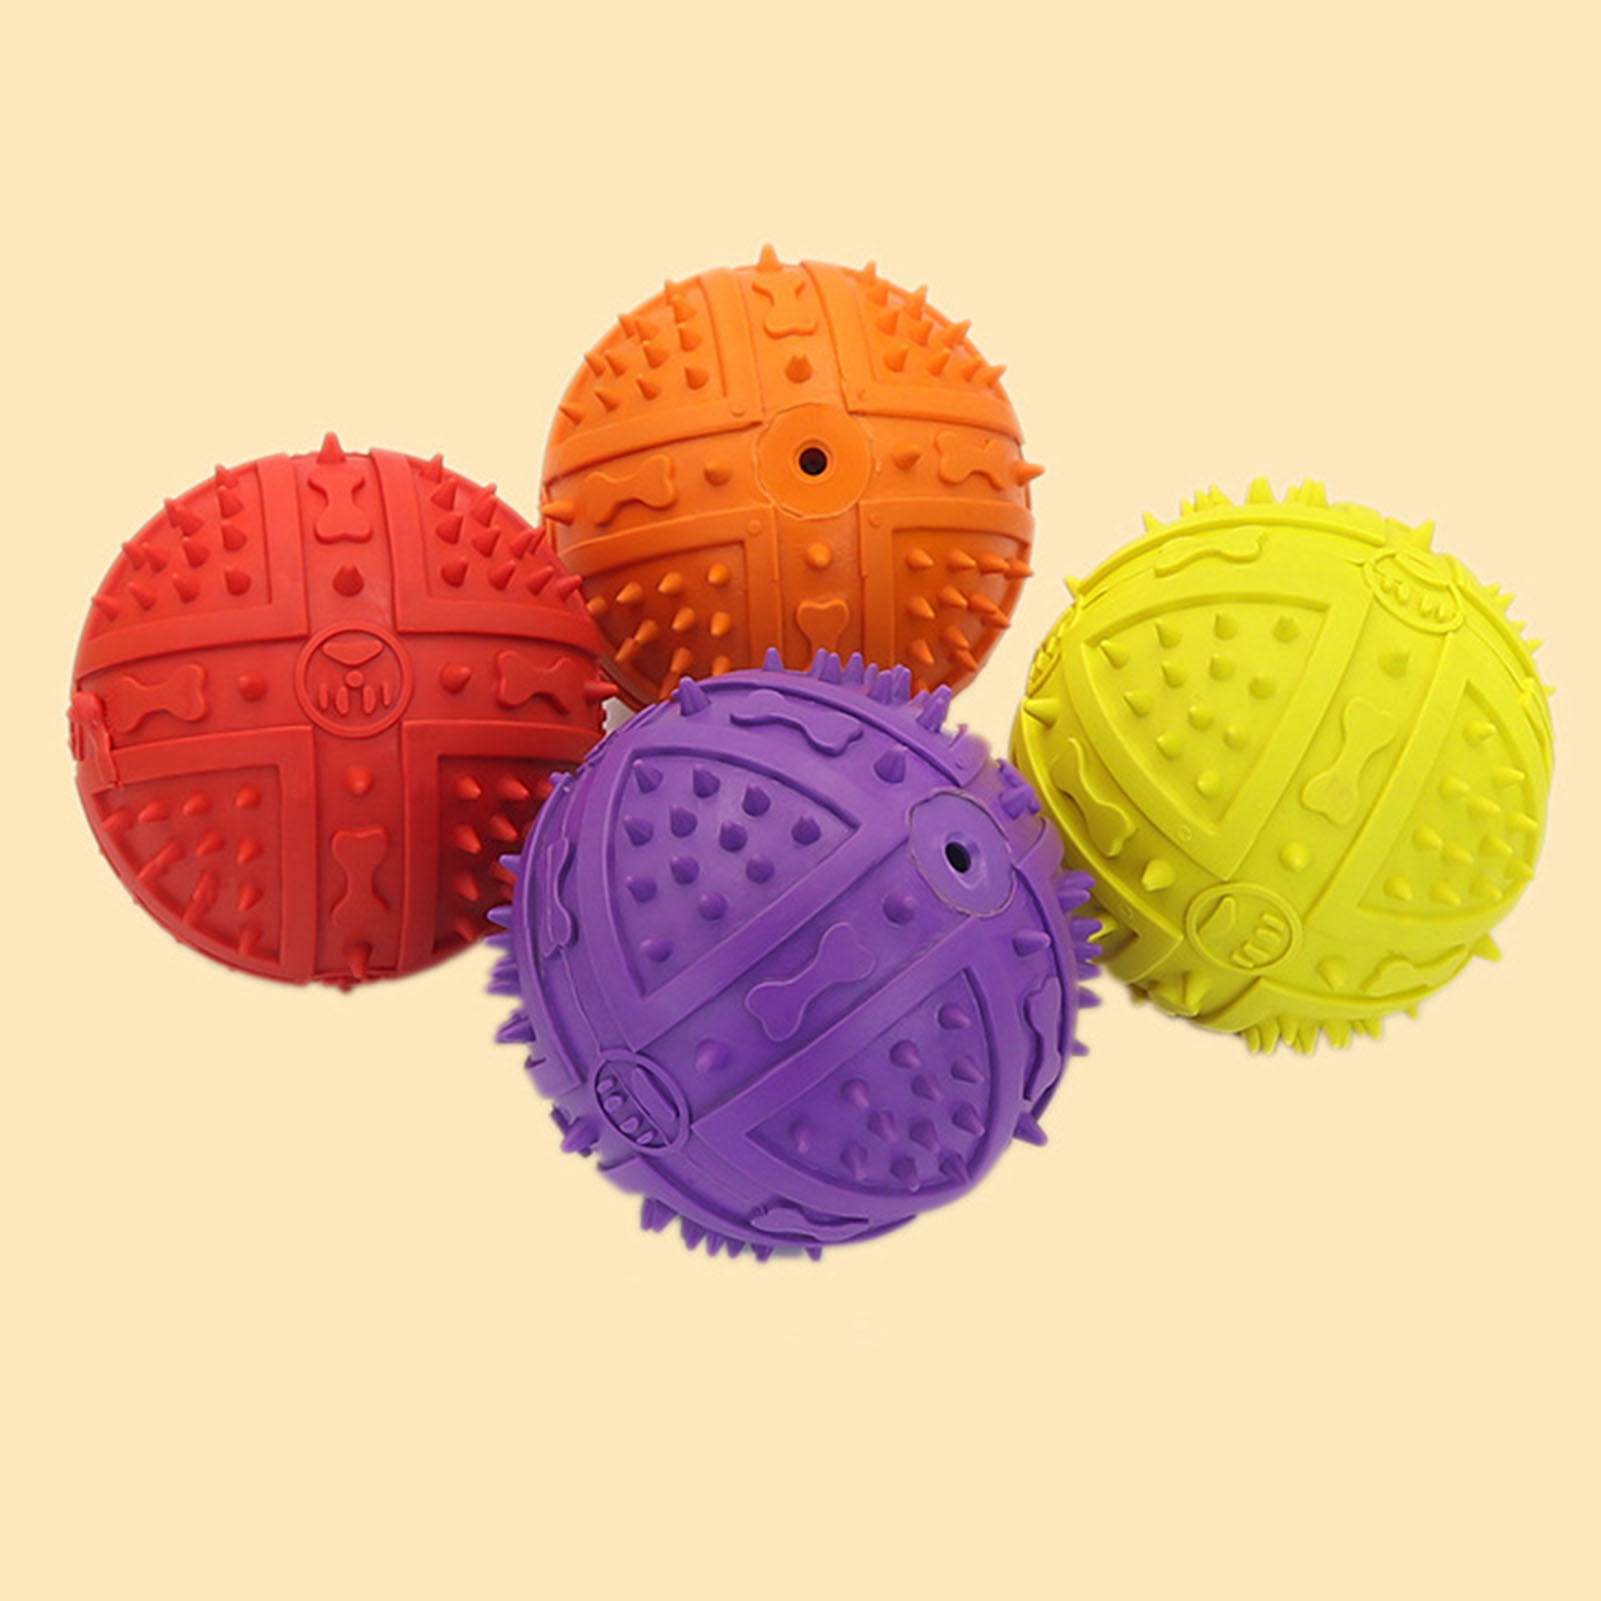 Interactive Dog Toy Ball For Puzzle Training - Perfect For Small